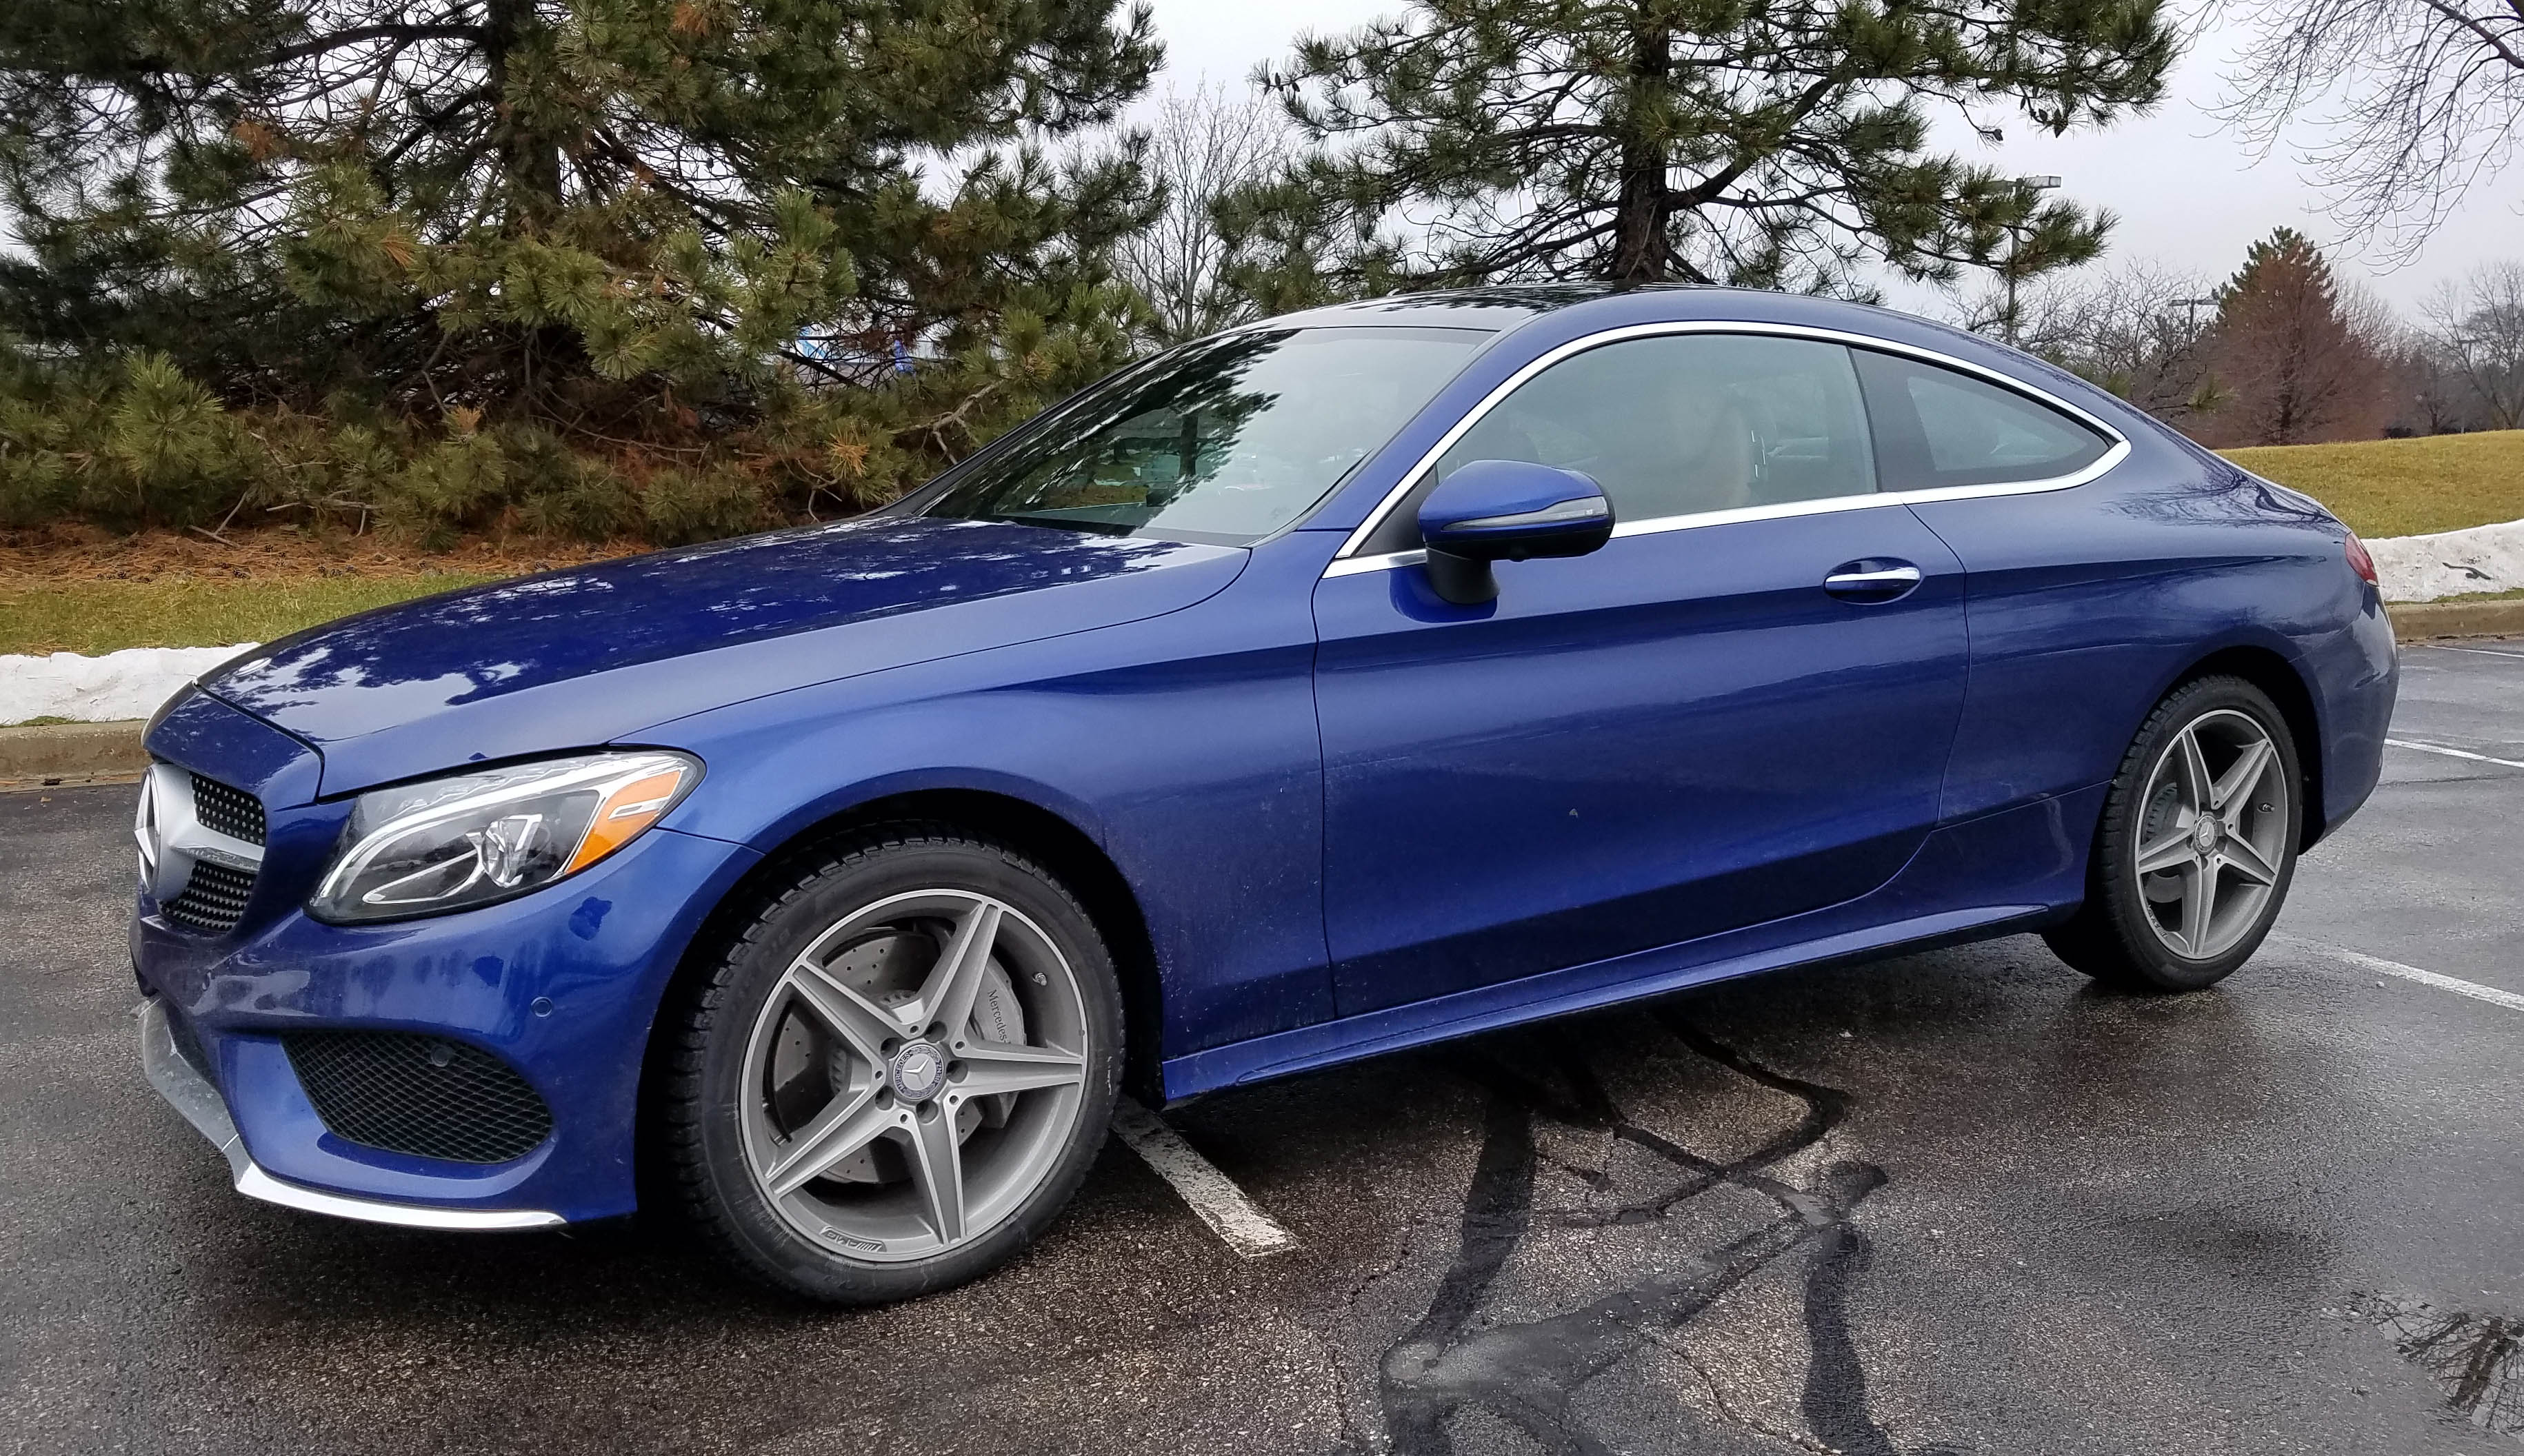 2017 MercedesBenz C300 Coupe ThreePointed Star Perfection